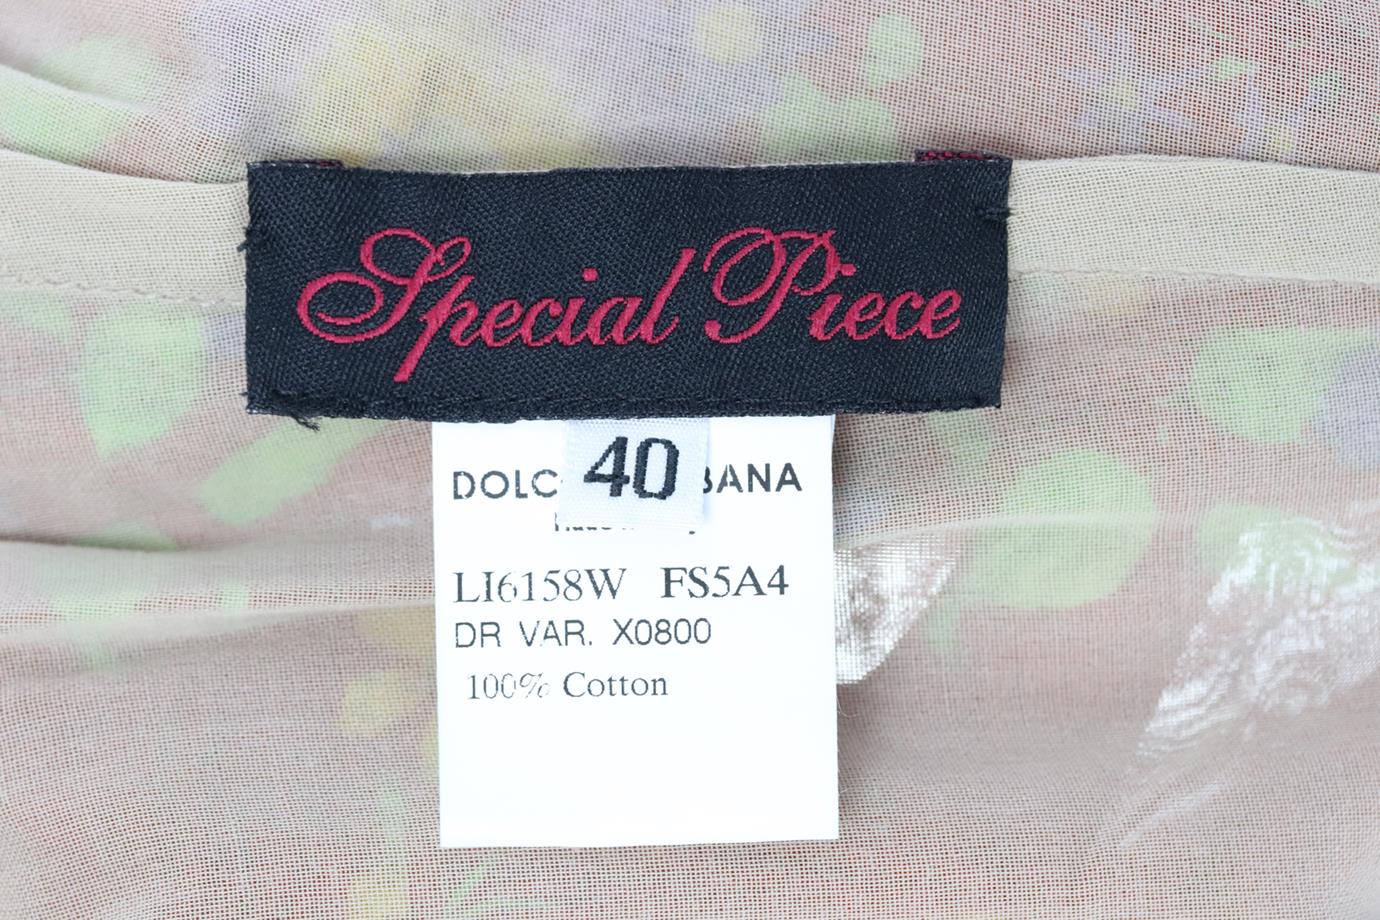 DOLCE AND GABBANA SPECIAL ORDER FLORAL PRINT COTTON DRESS IT 40 UK 8